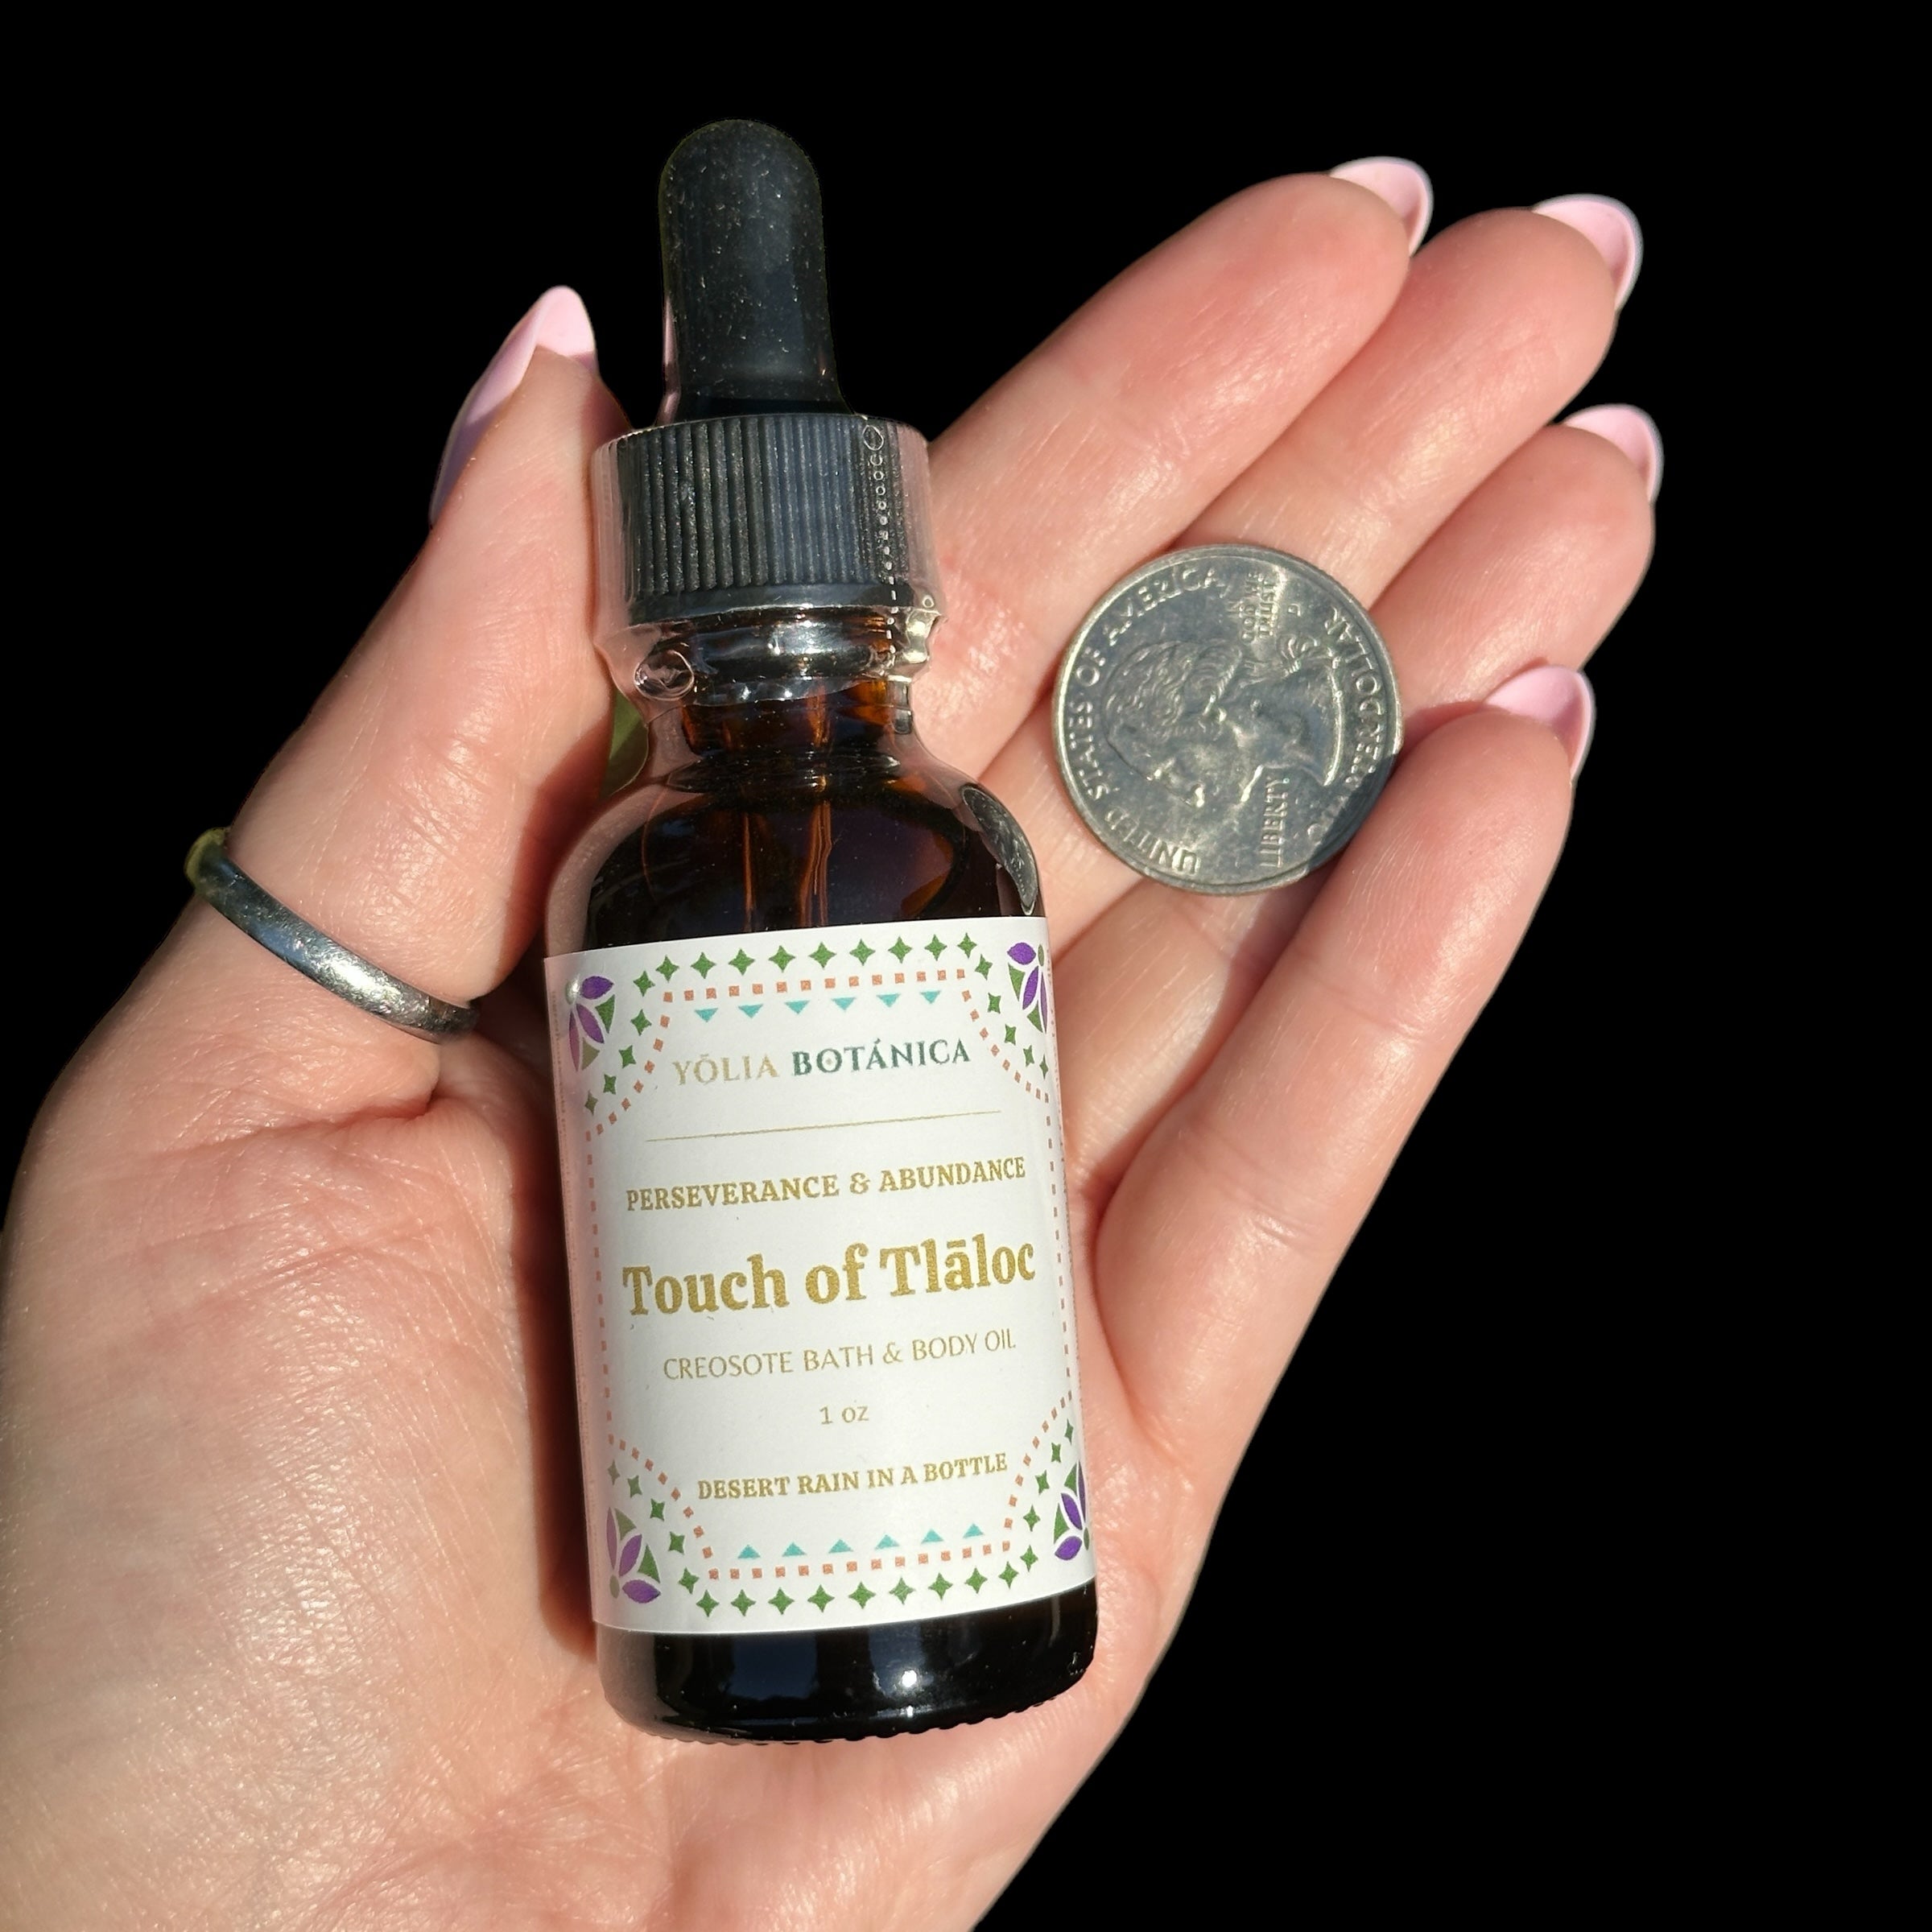 Touch of Tlāloc - Creosote Bath & Body Oil for Perseverance and Abundance